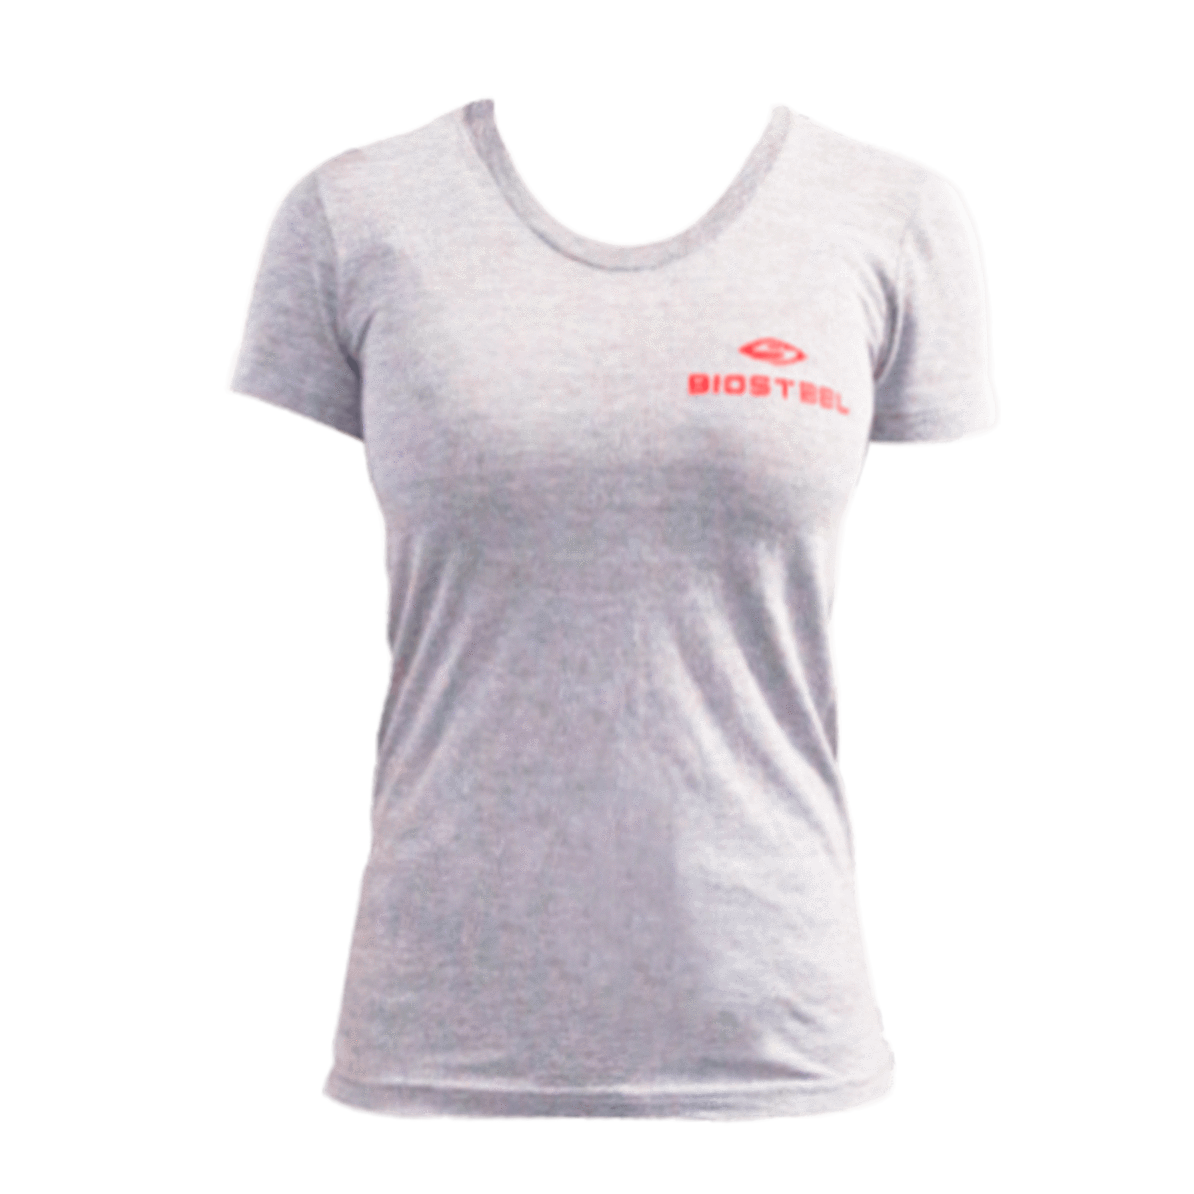 Women's Official BioSteel T-Shirt - The System: Art & Science of Coaching